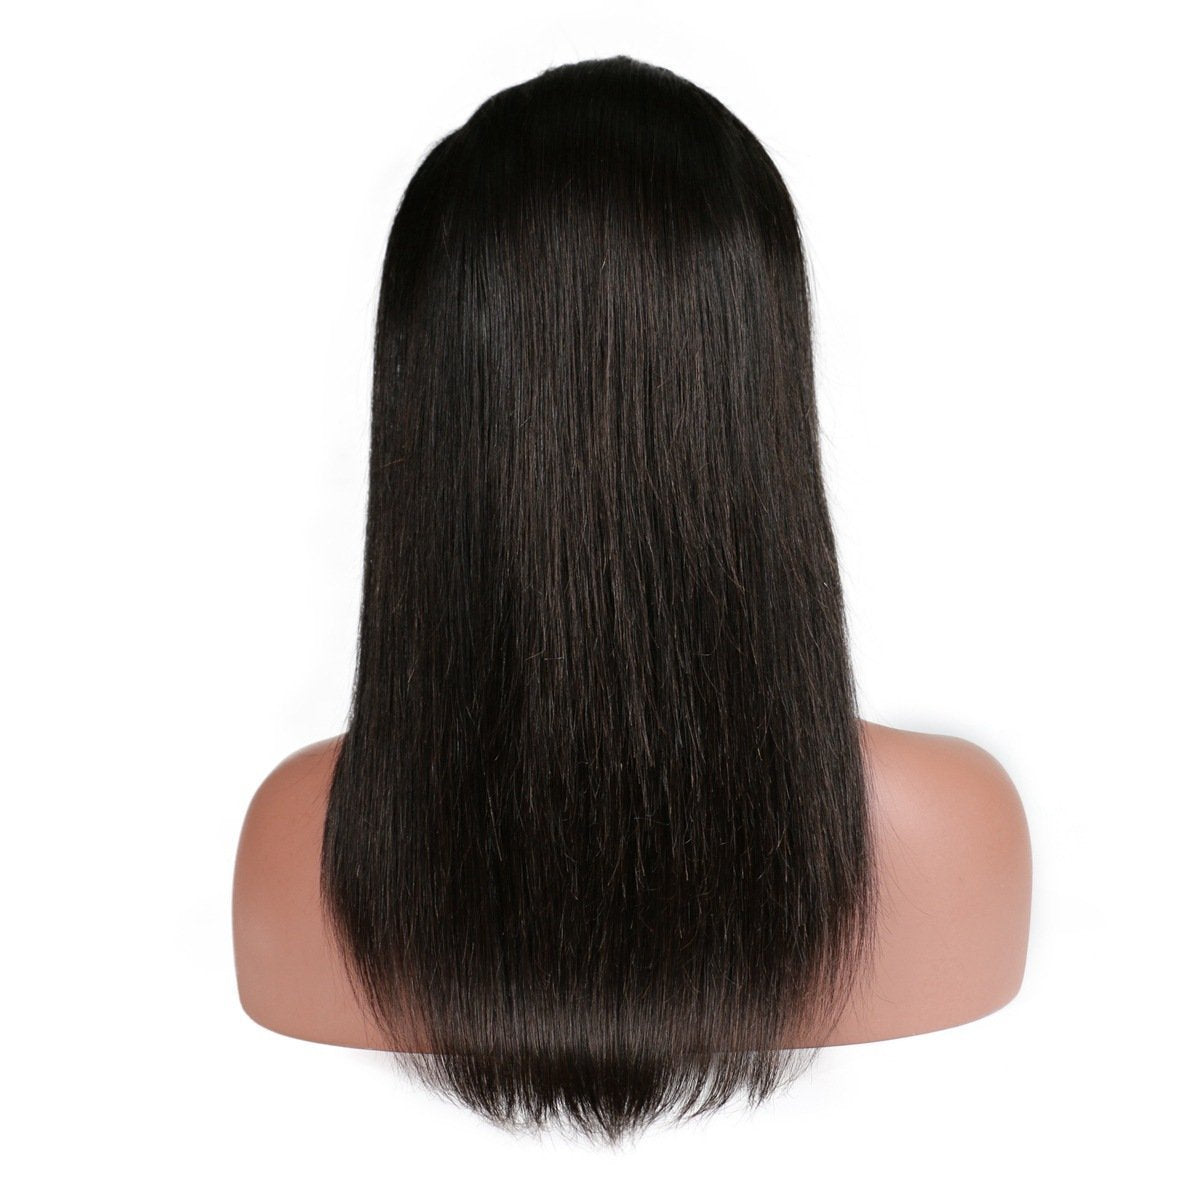 Lush Locks Full Lace Remy Human Hair Wigs for Women.